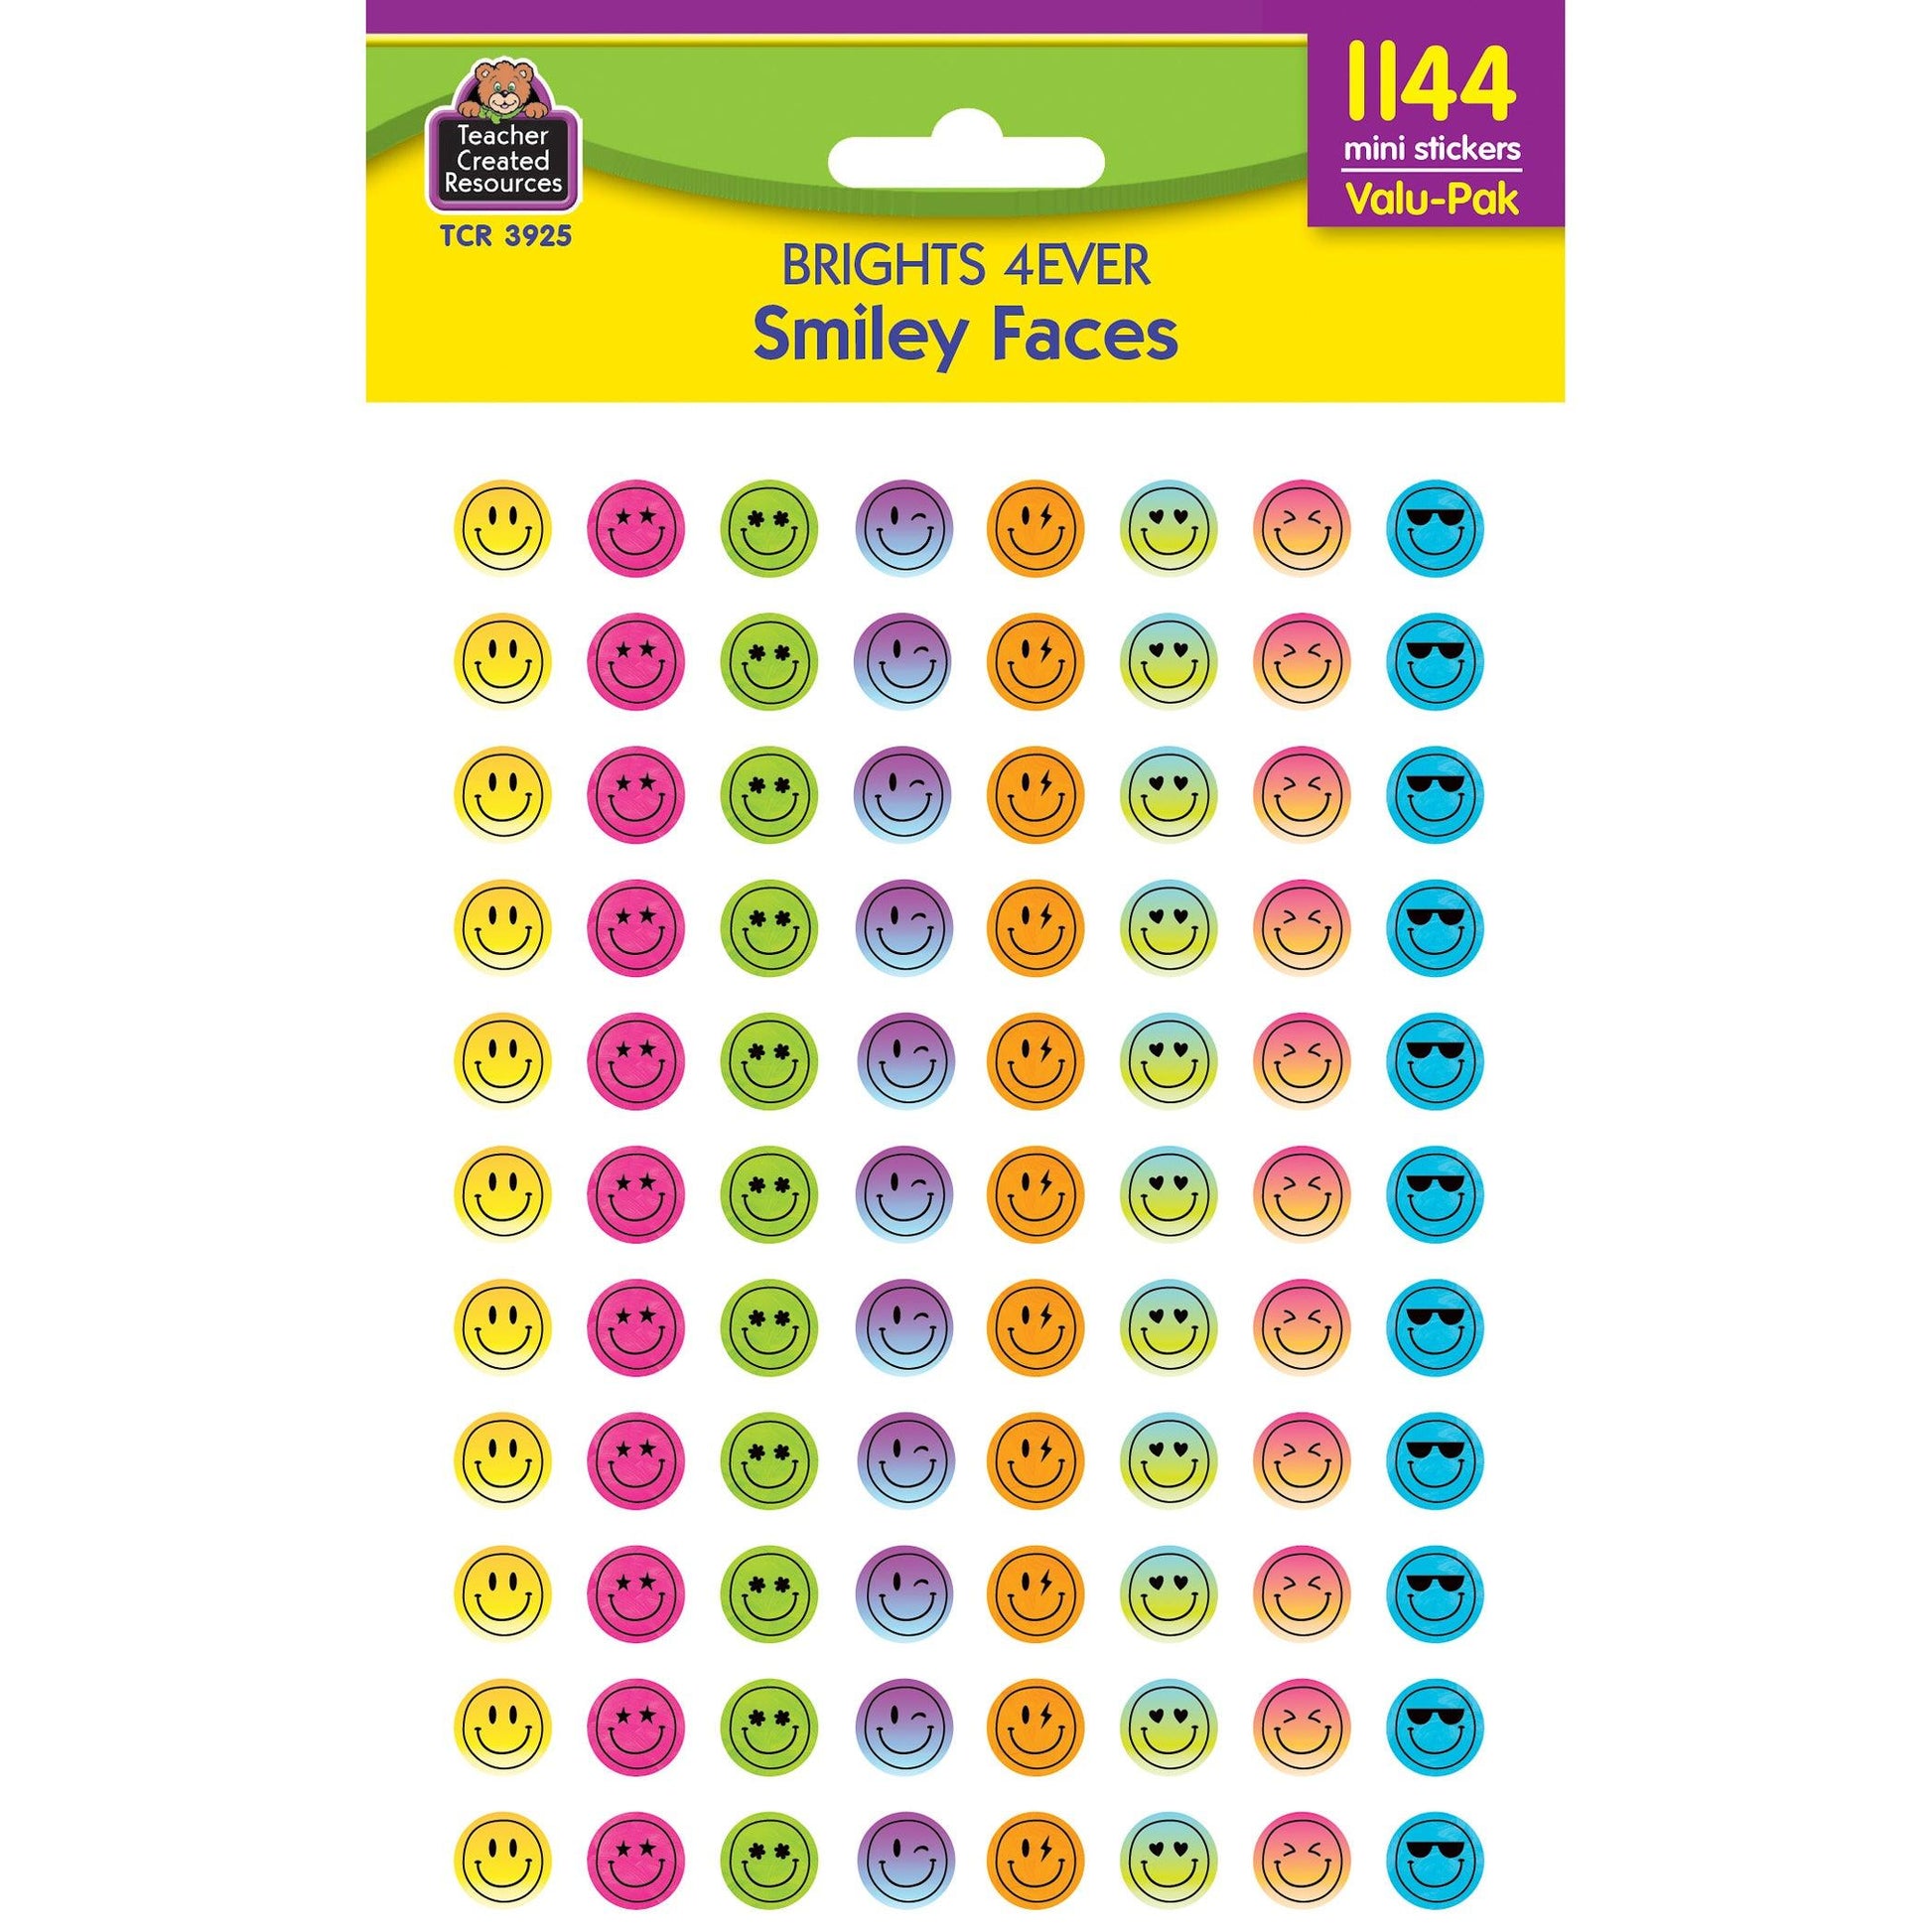 Brights 4Ever Smiley Faces Mini Stickers Valu-Pack, 1144 Per Pack, 6 Packs - Loomini